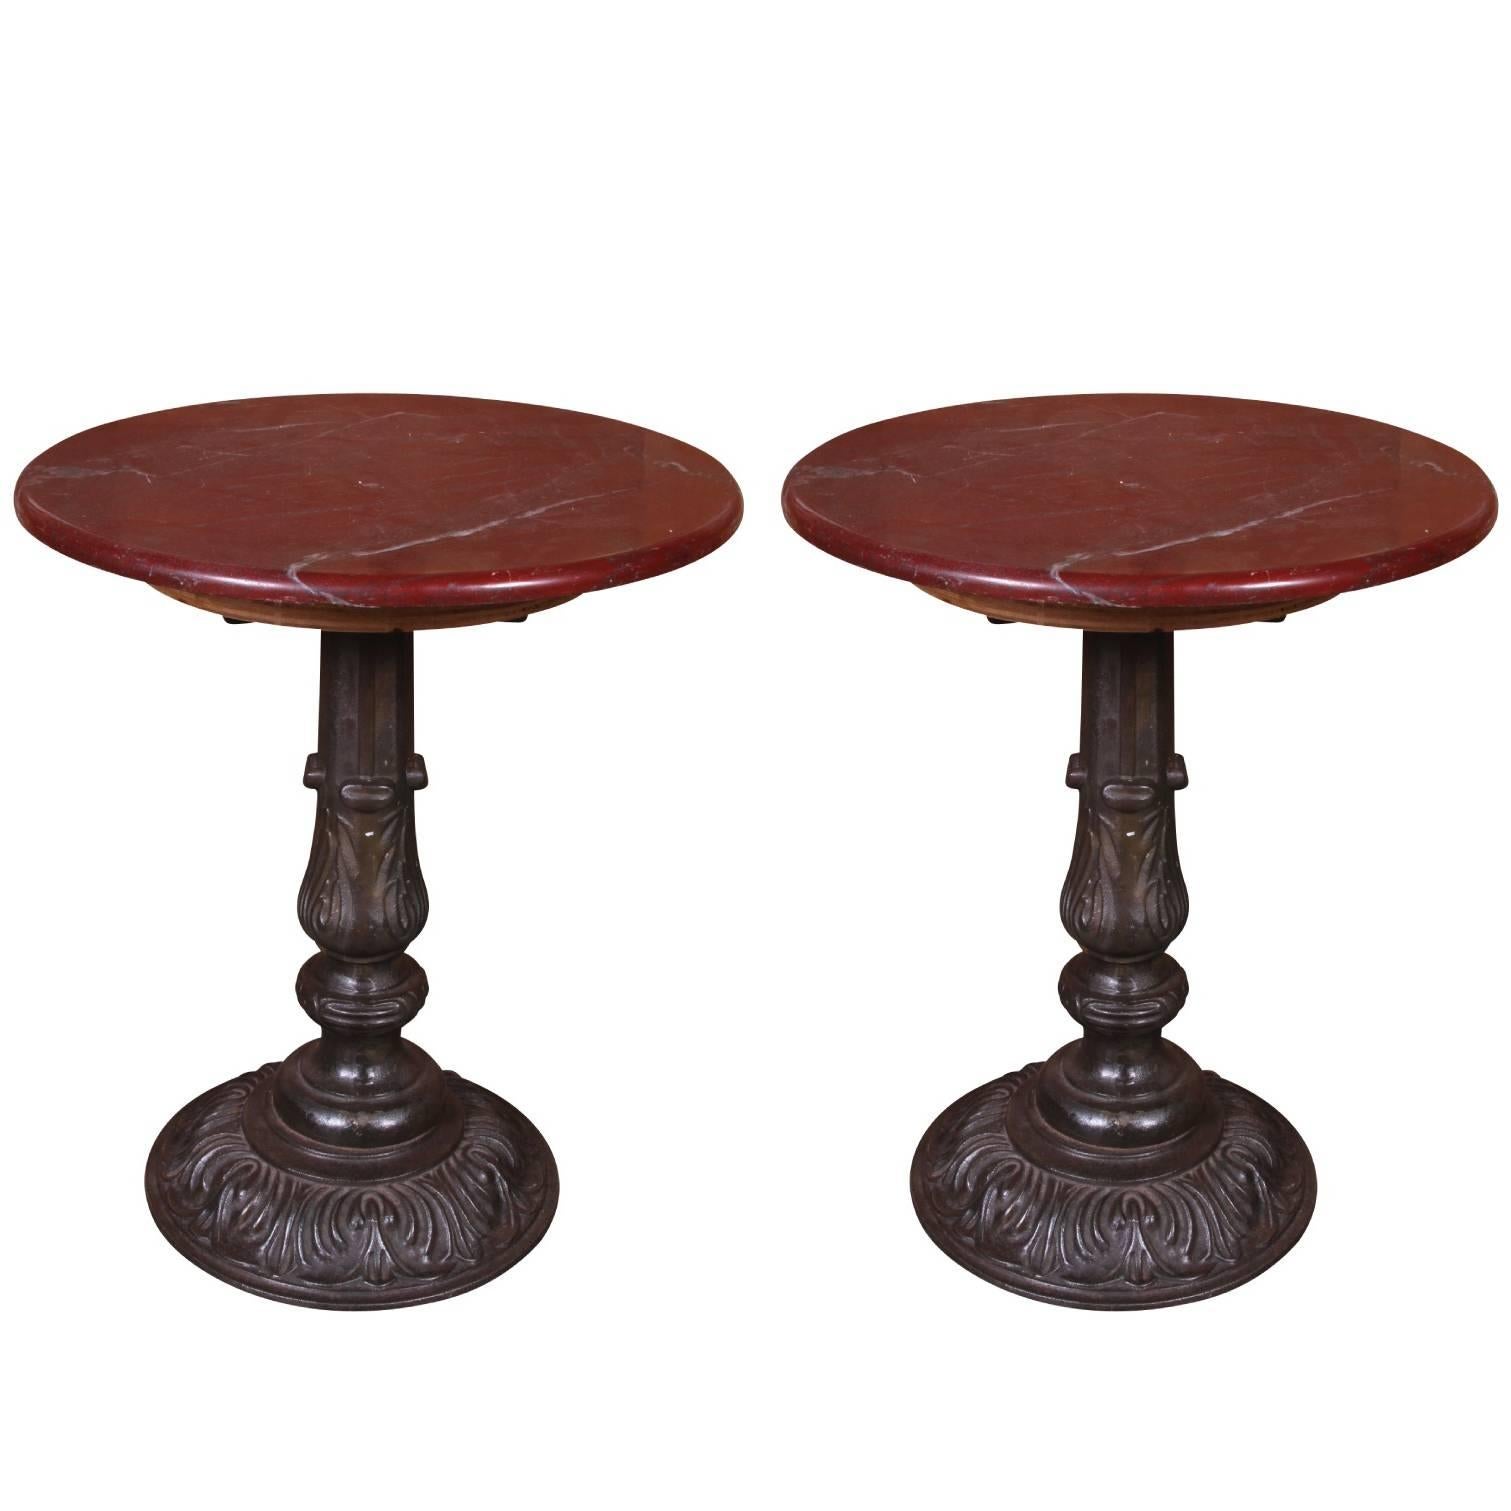 Carlyle Hotel Ox Blood Marble Cafe Table Pair